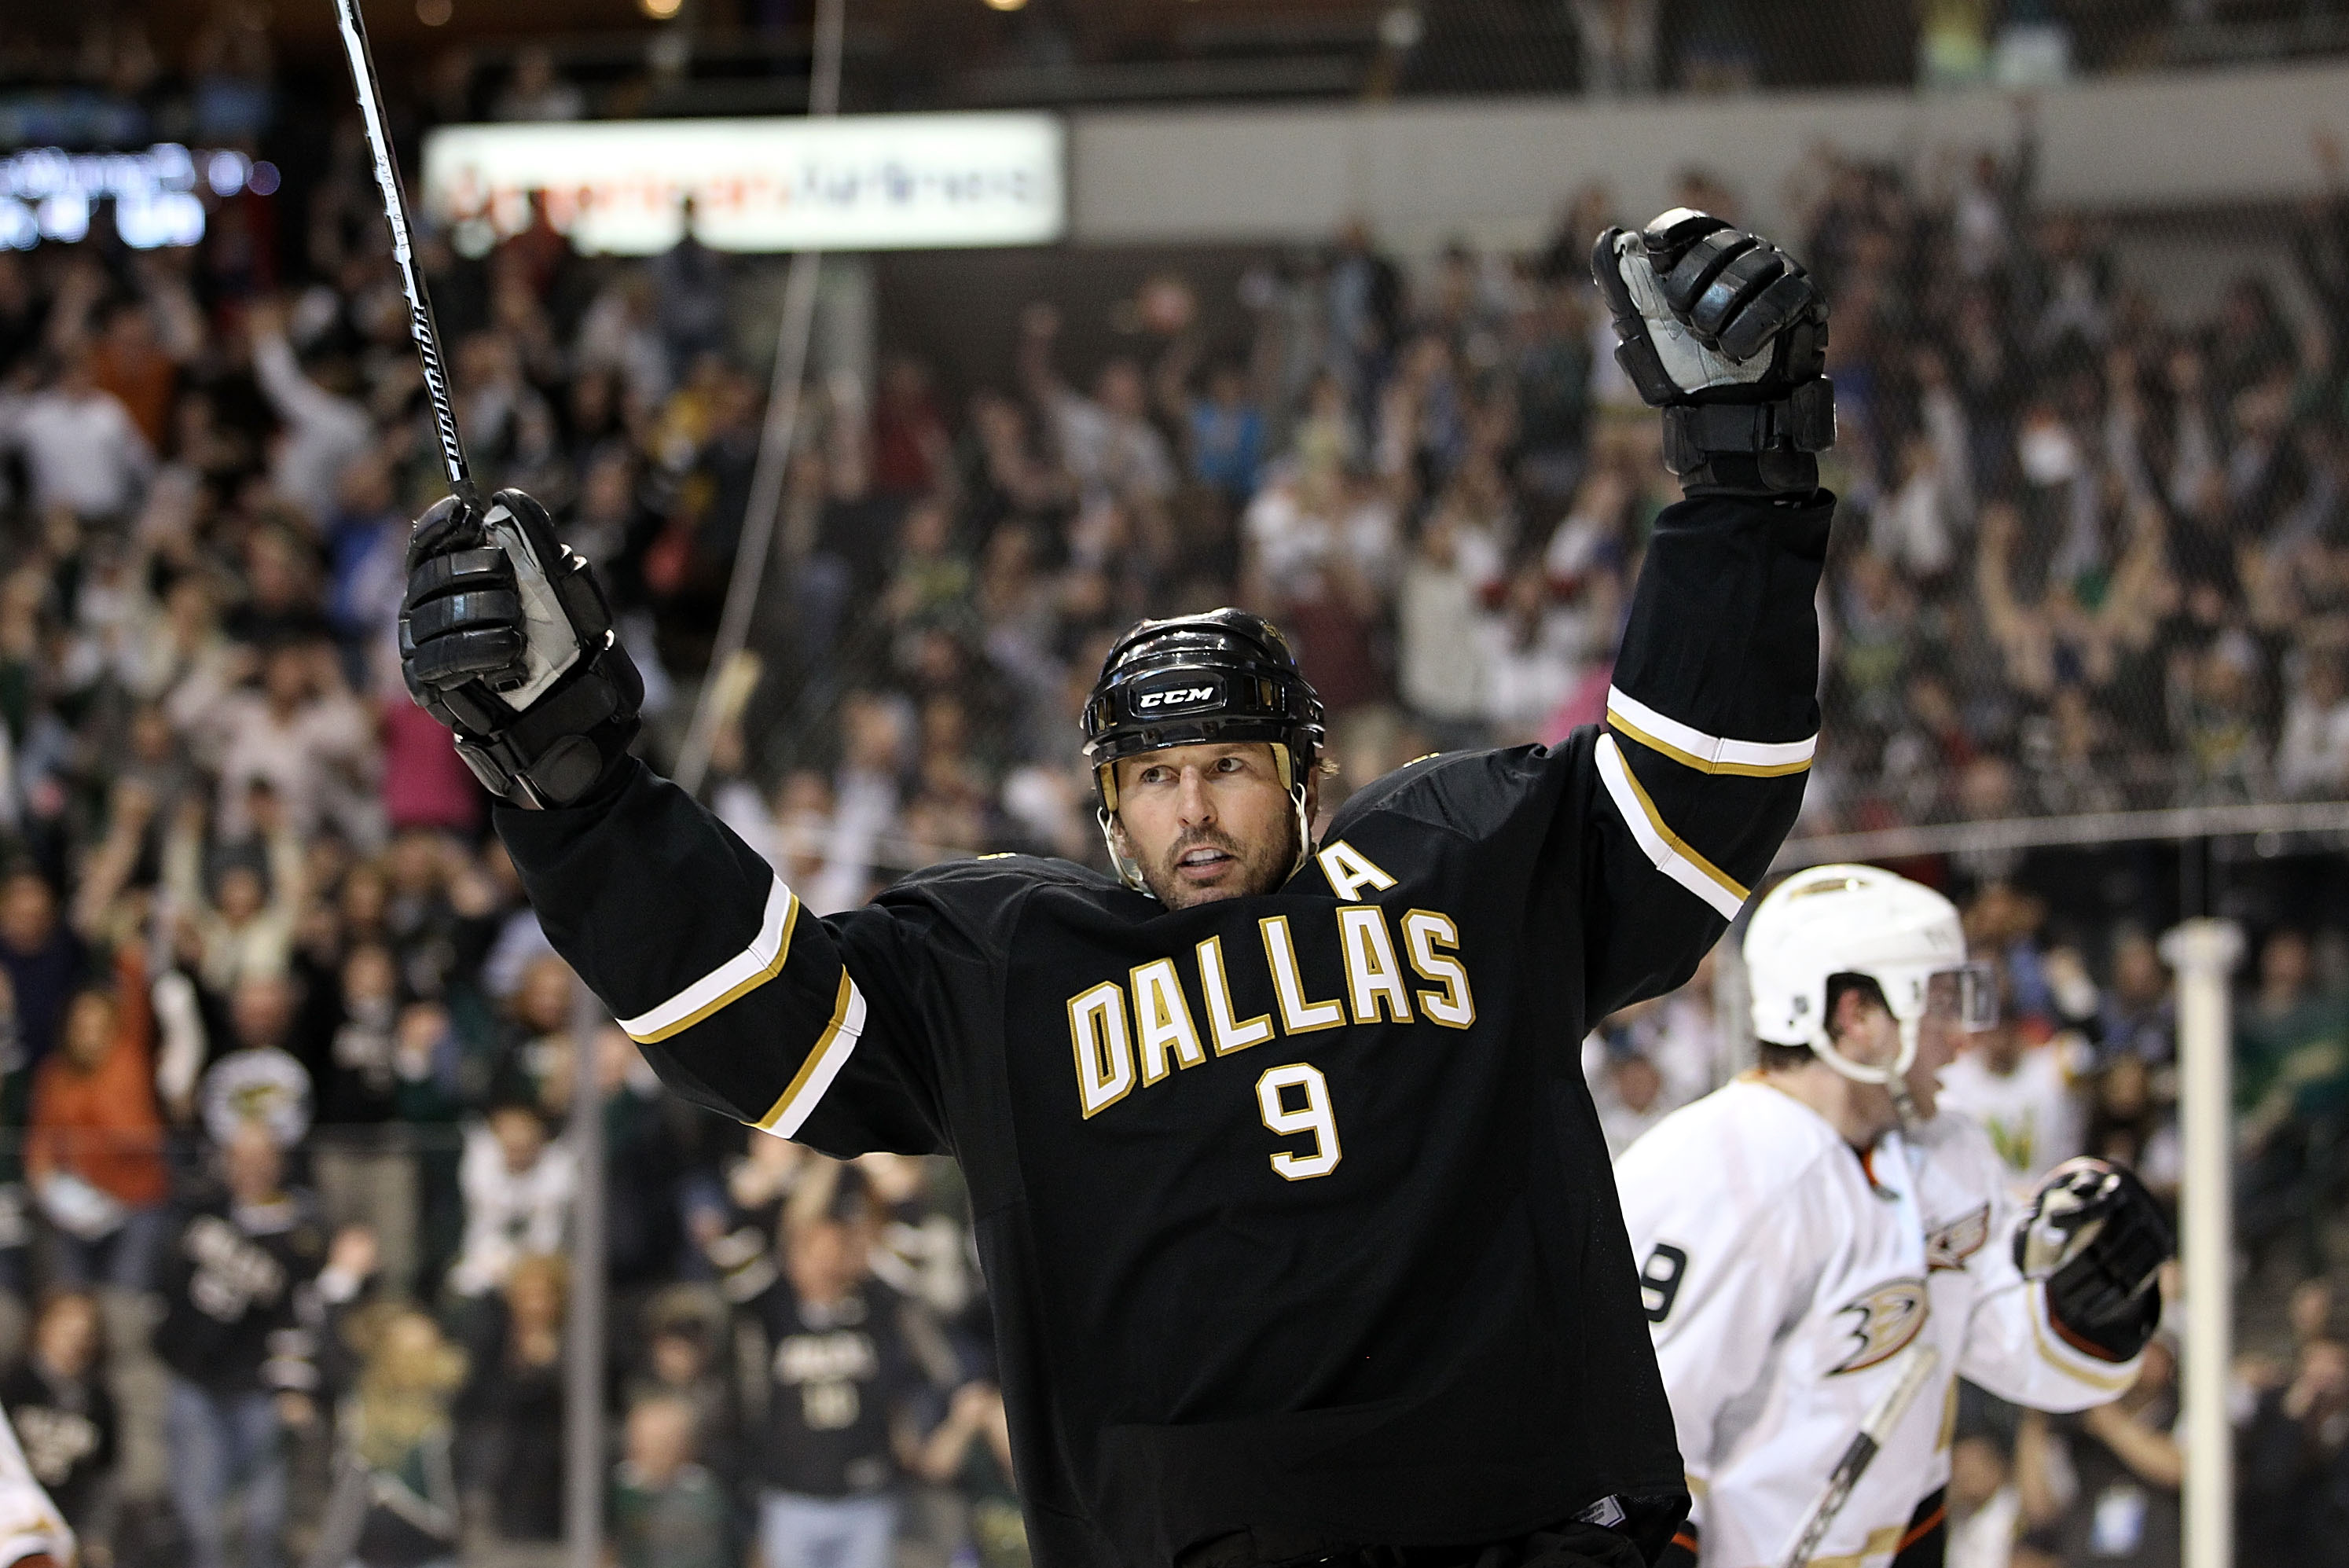 Mike Modano is finally back 'home' in Minnesota, 30 years after